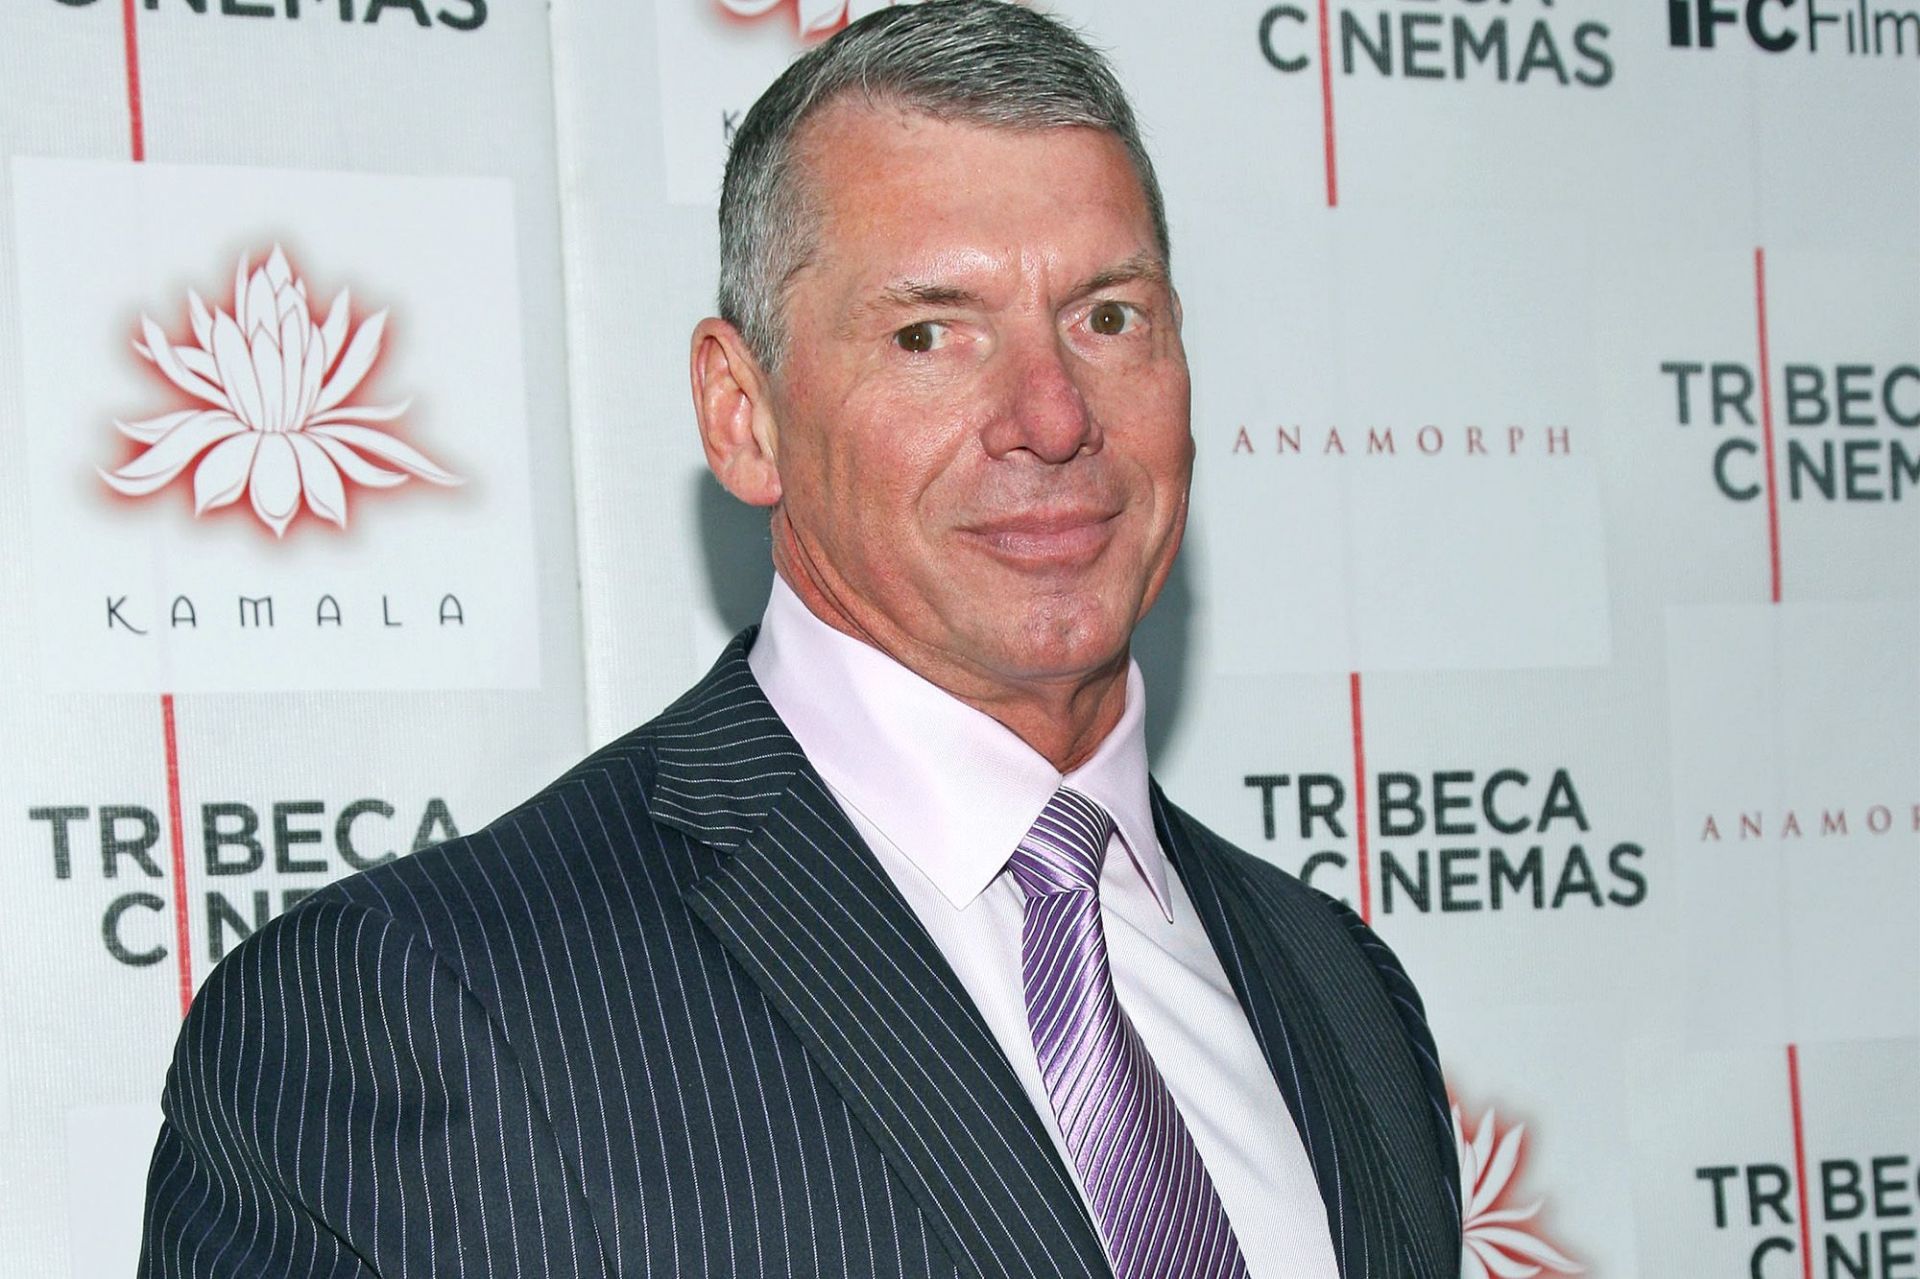 Vince McMahon retired from the company in July 2022